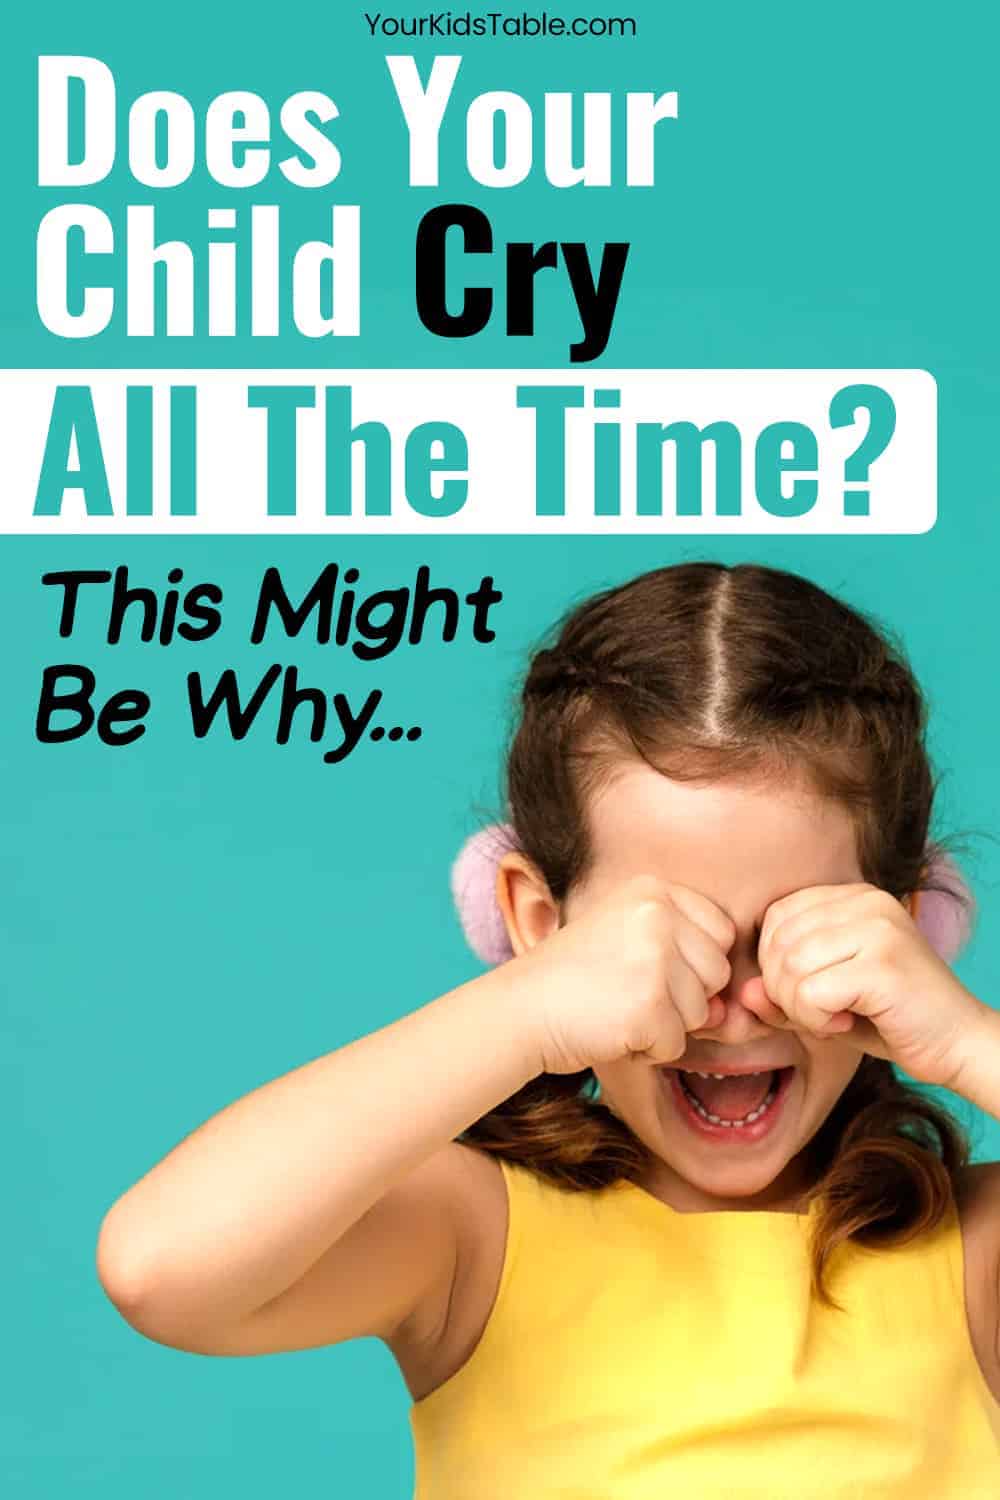 Have a toddler who cries all the time, or an older child who is always crying? Learn hidden reasons why your 1, 2, 3, or 4 year old constantly cries and how to help sensitive kids.